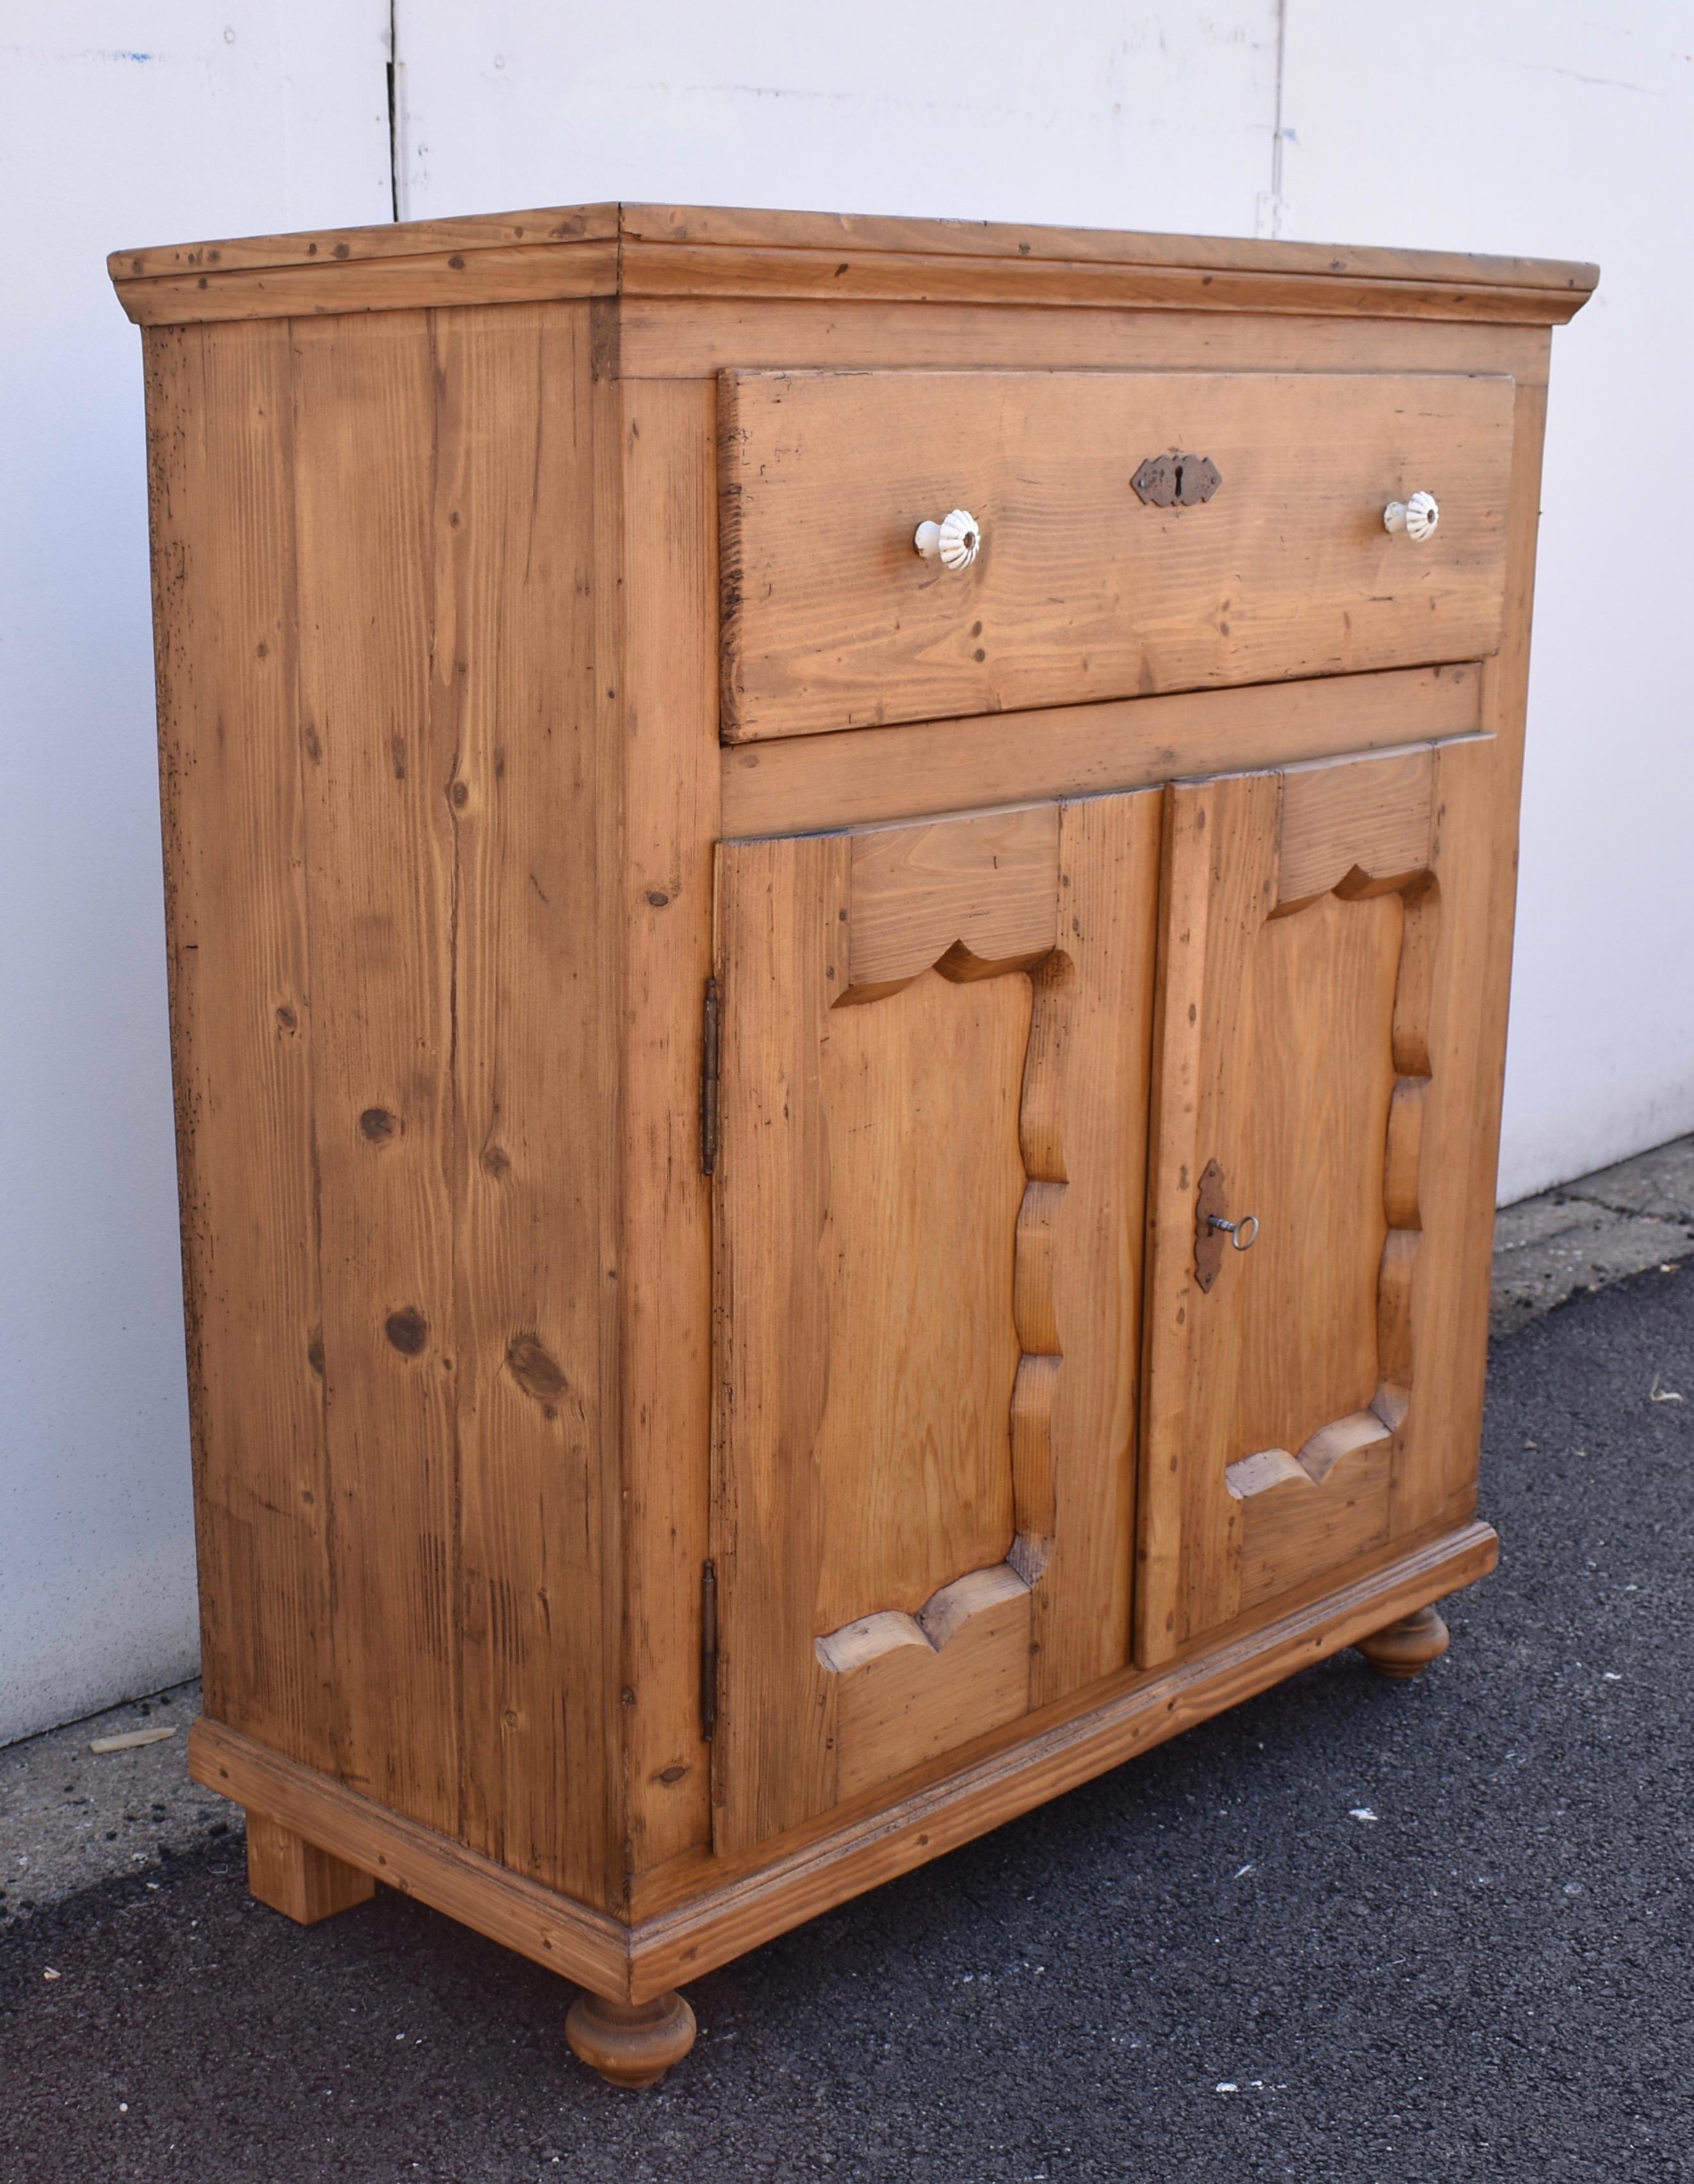 This lovely little dresser base has exposed dovetails on the top with an ogee molding forming the crown.  The case is very plain as is the front of the deep single hand-cut dovetailed drawer.  The door frames have Dutch style scalloped rails and